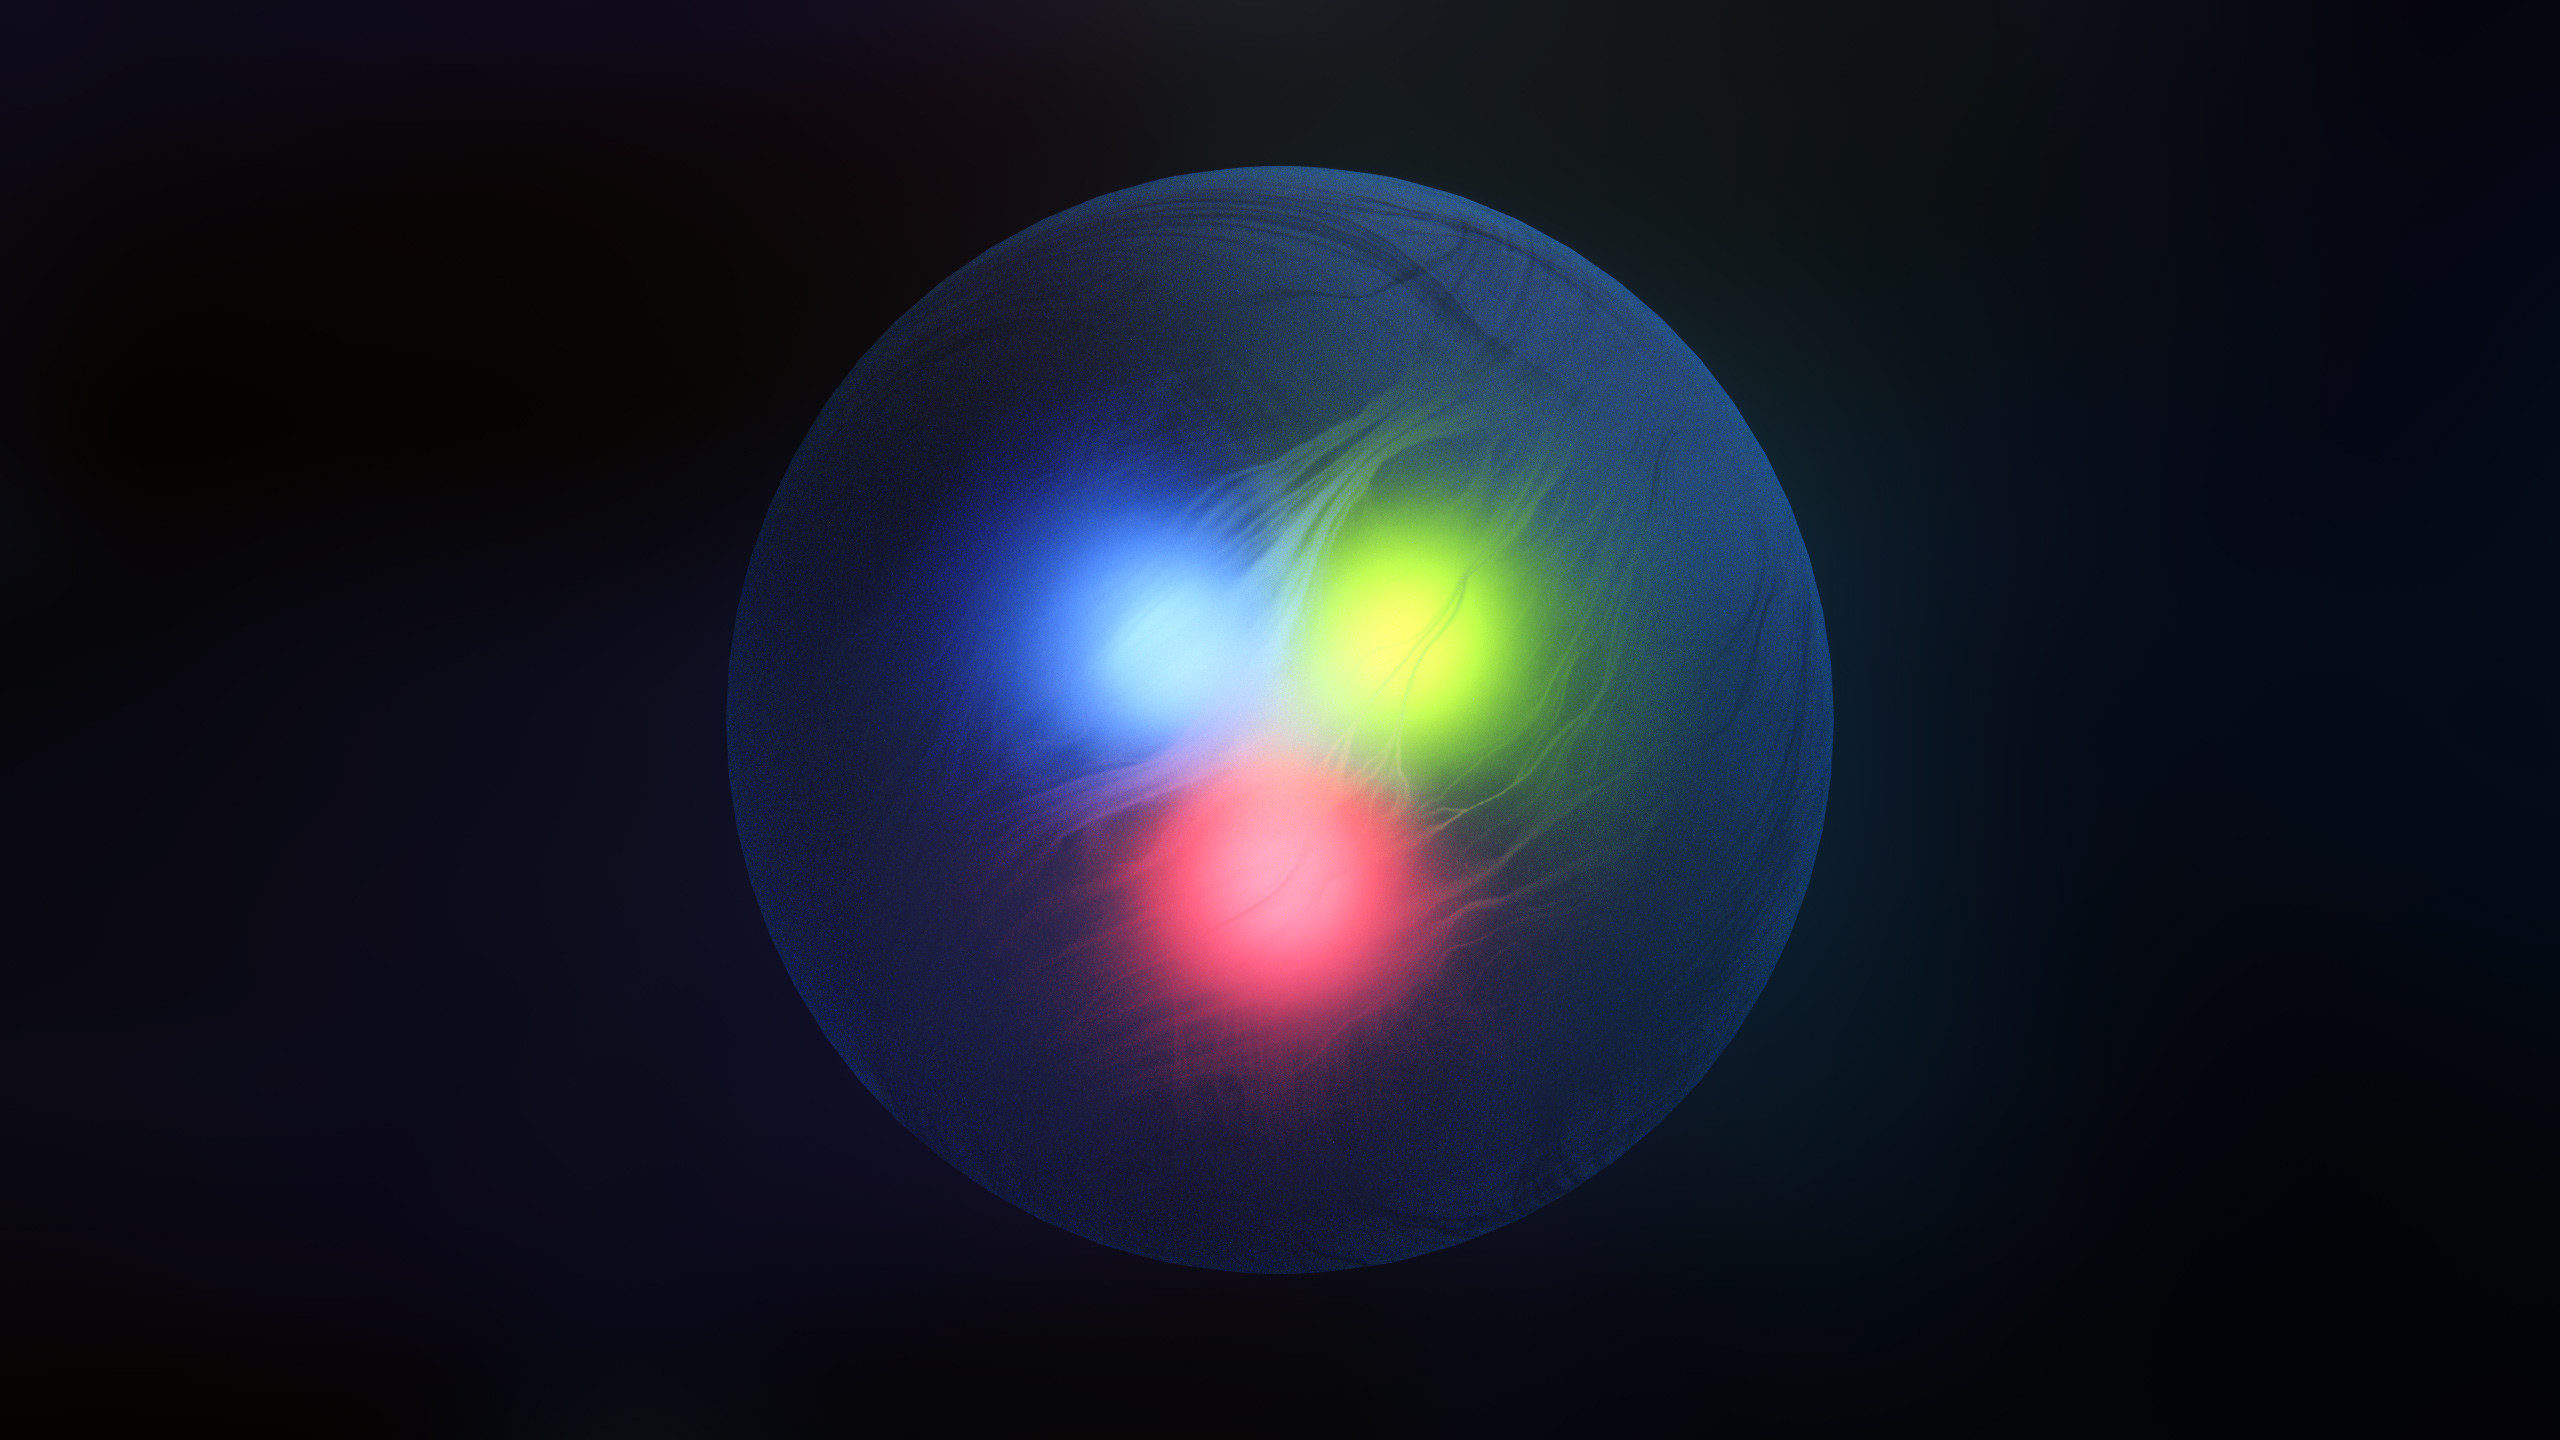 Proton particle. Although the structure is not clearly visible here, I follow physicist Sabine Hossenfelder's advice for proton models: https://tinyurl.com/sh-proton